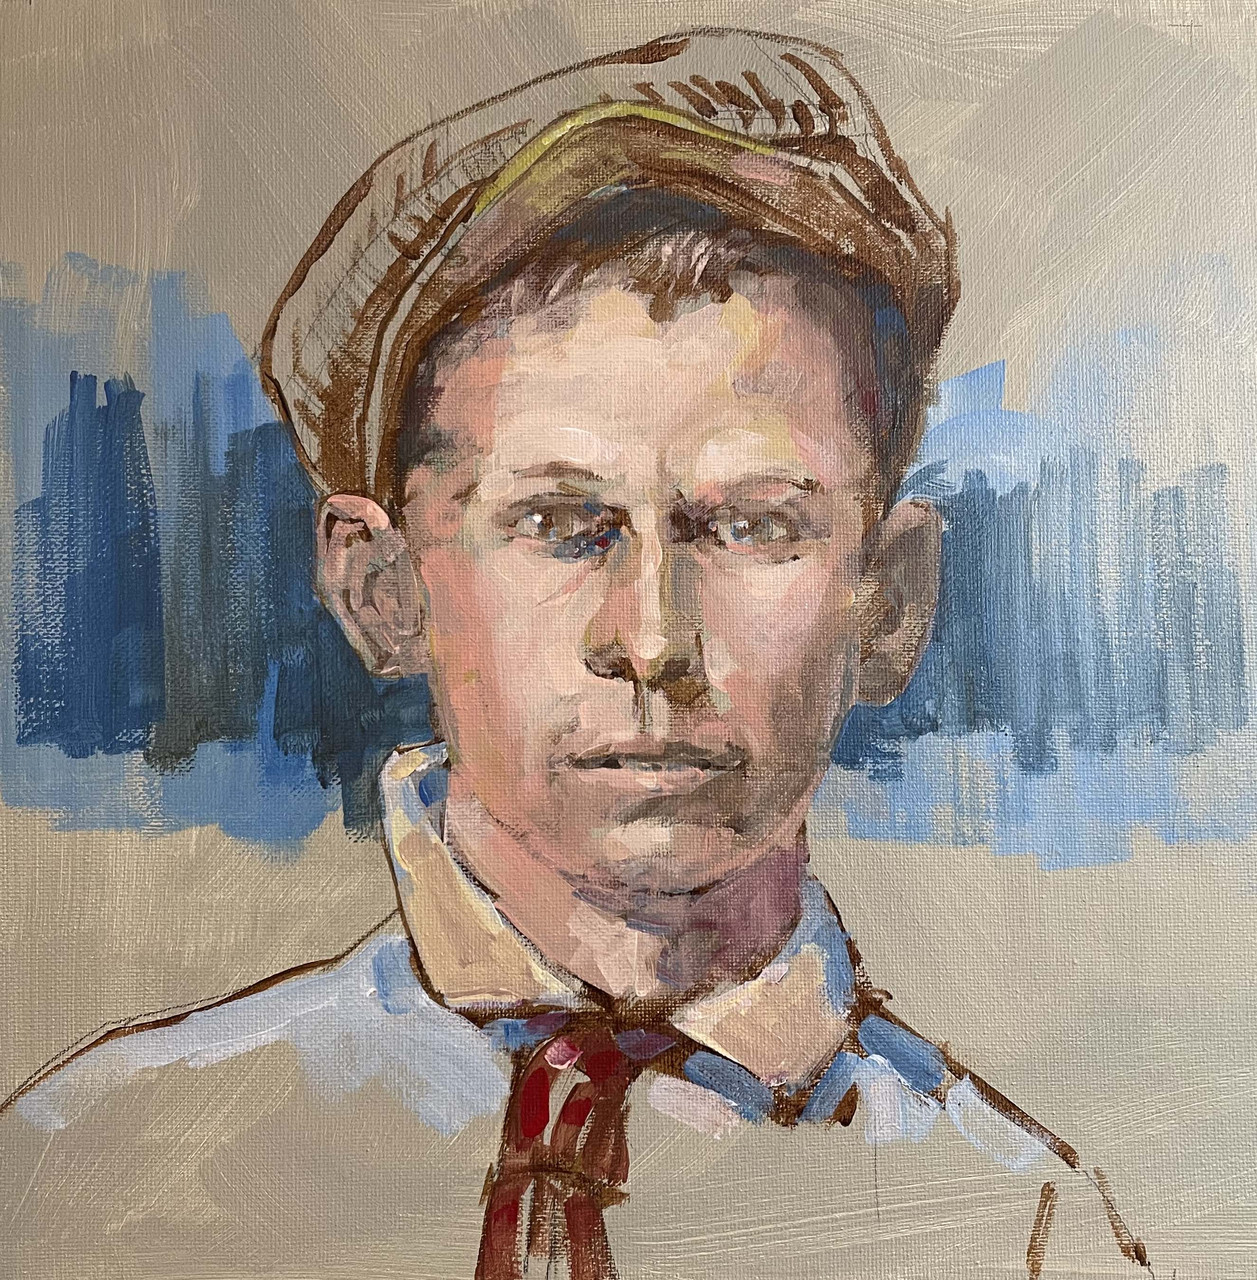 A collection of portrait paintings and personal histories of ordinary and mostly forgotten Key West men and women of a hundred years ago, based on their World War I Navy waterfront pass photos.